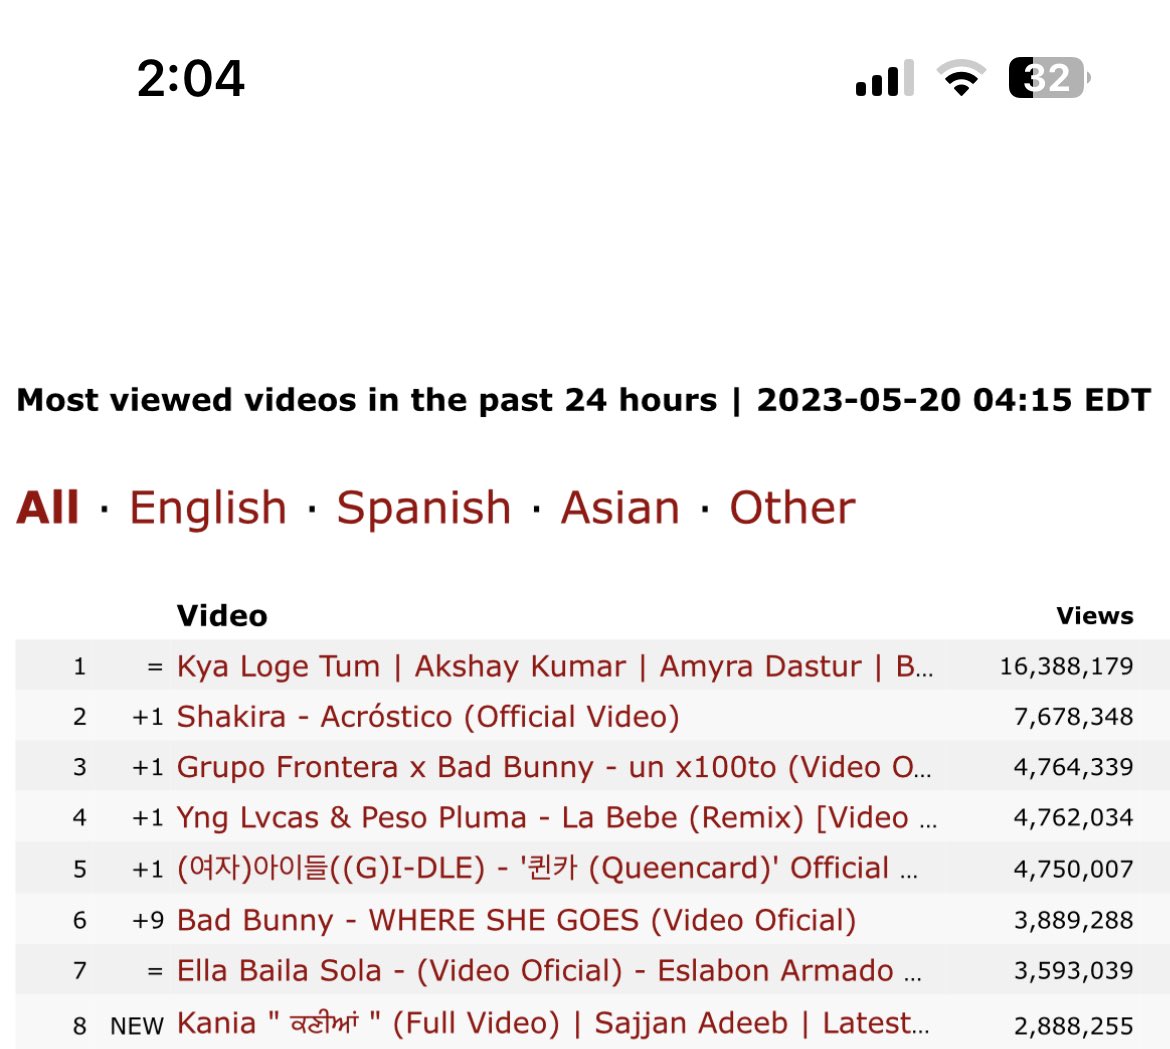 #kyalogetum Song Rulling the chartrs !!

Most viewed Video in last 24 hours !

#AkshayKumar